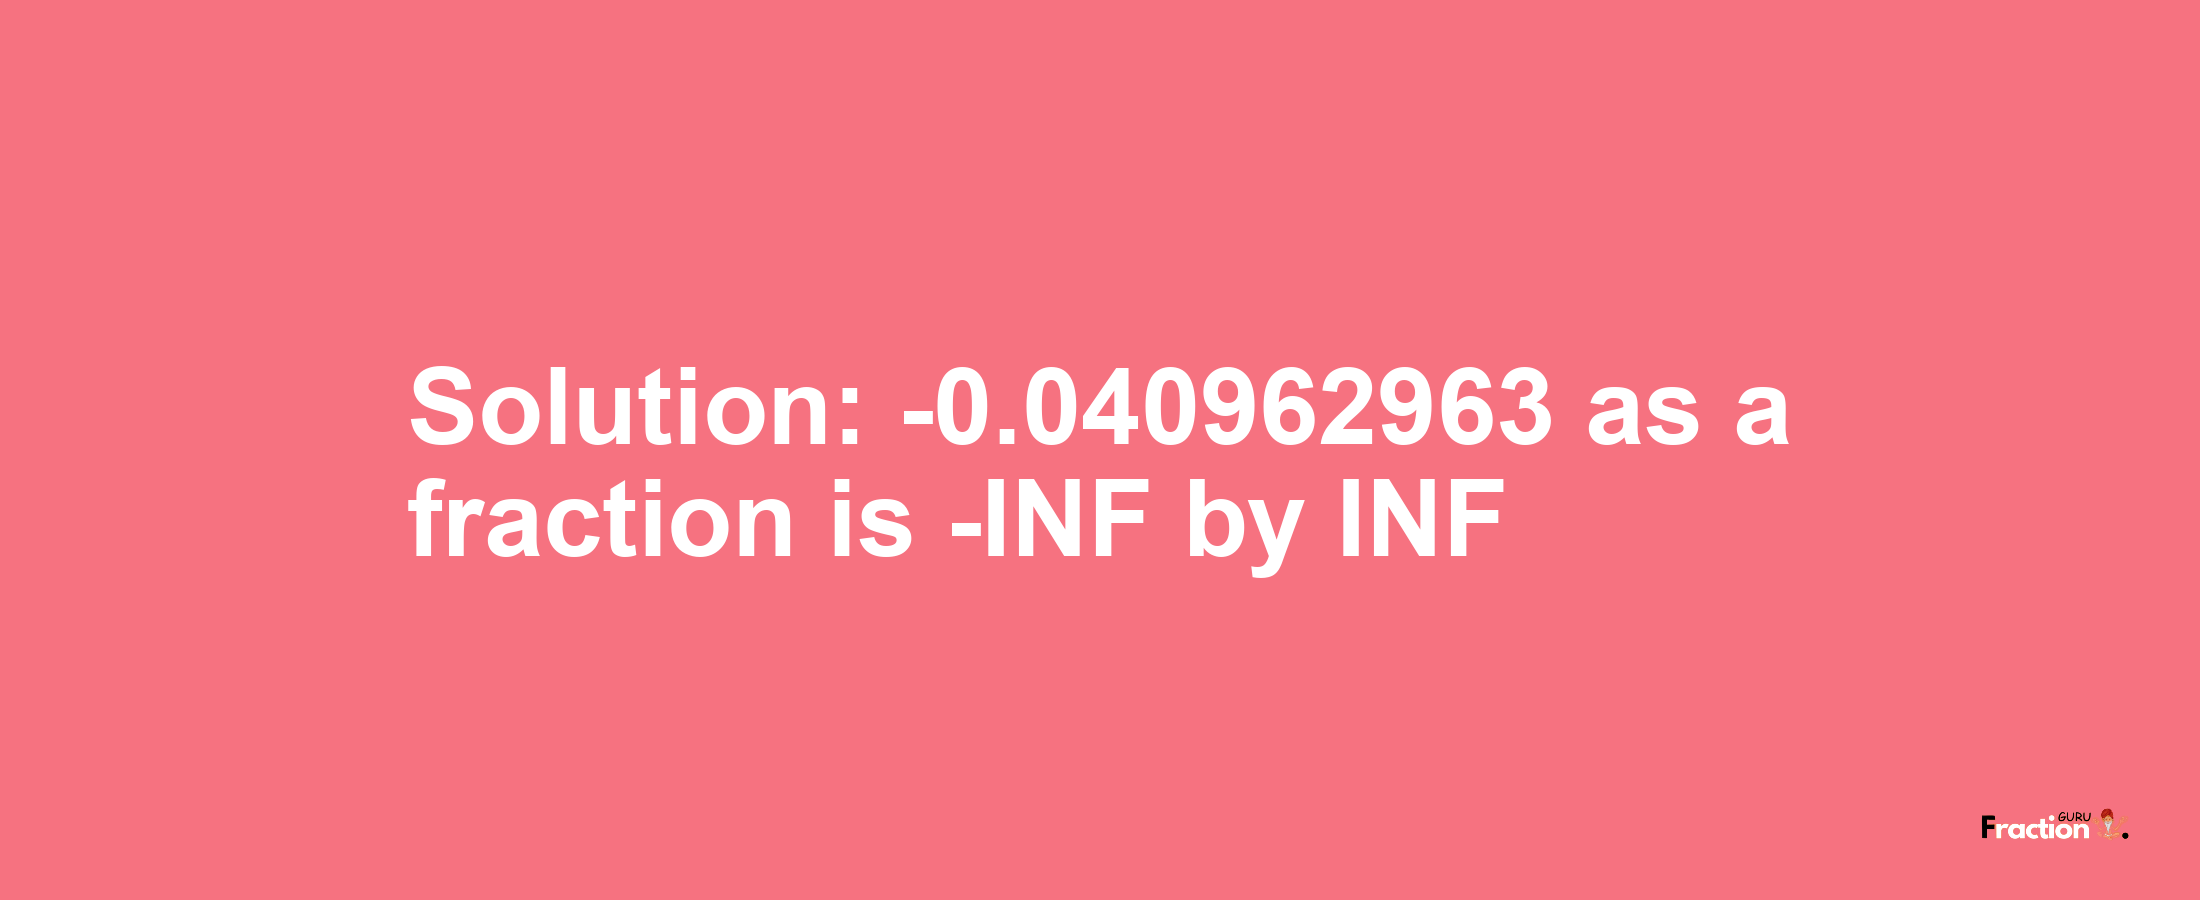 Solution:-0.040962963 as a fraction is -INF/INF